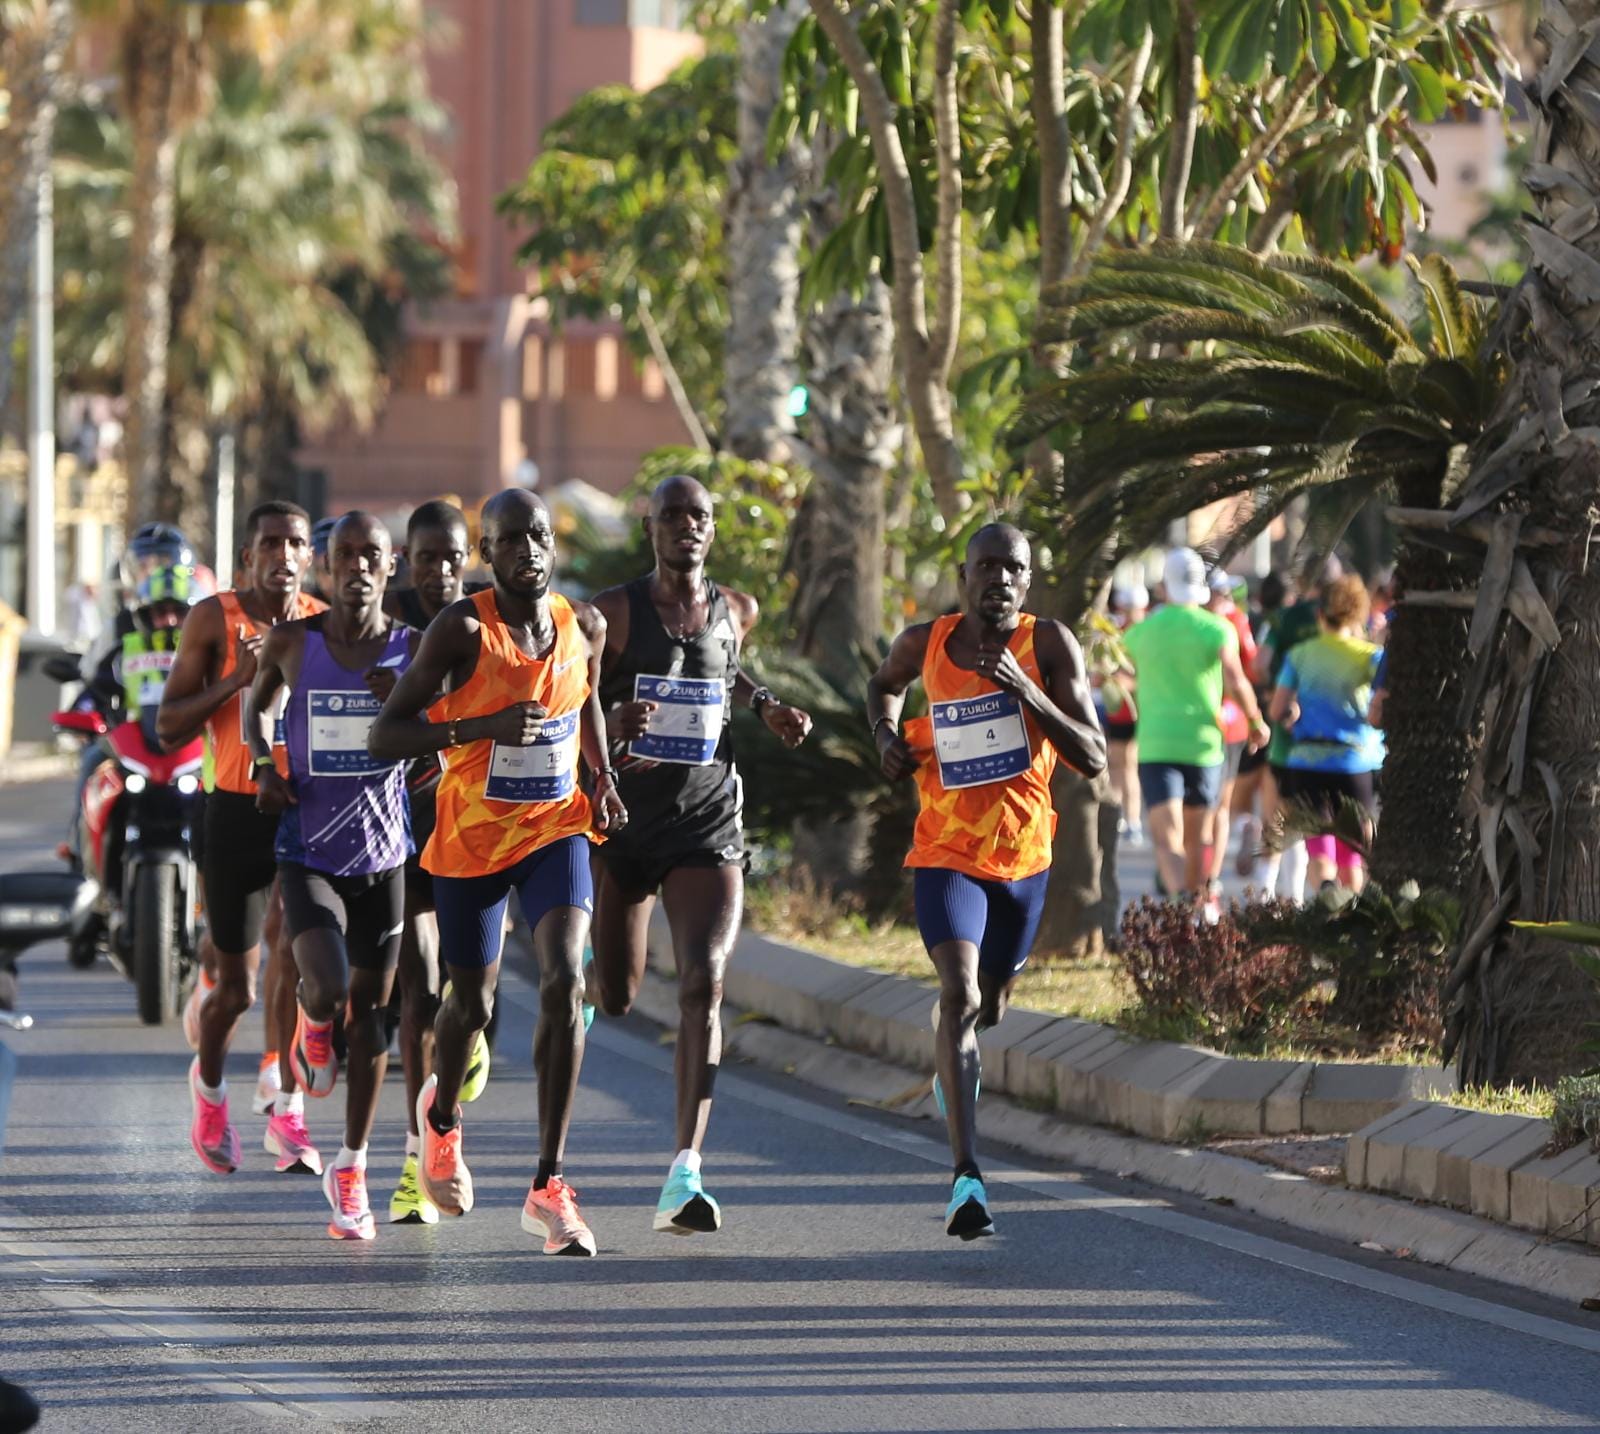 Around 9,000 runners participated in the event that also included a half-marathon, which had 4,700 participants